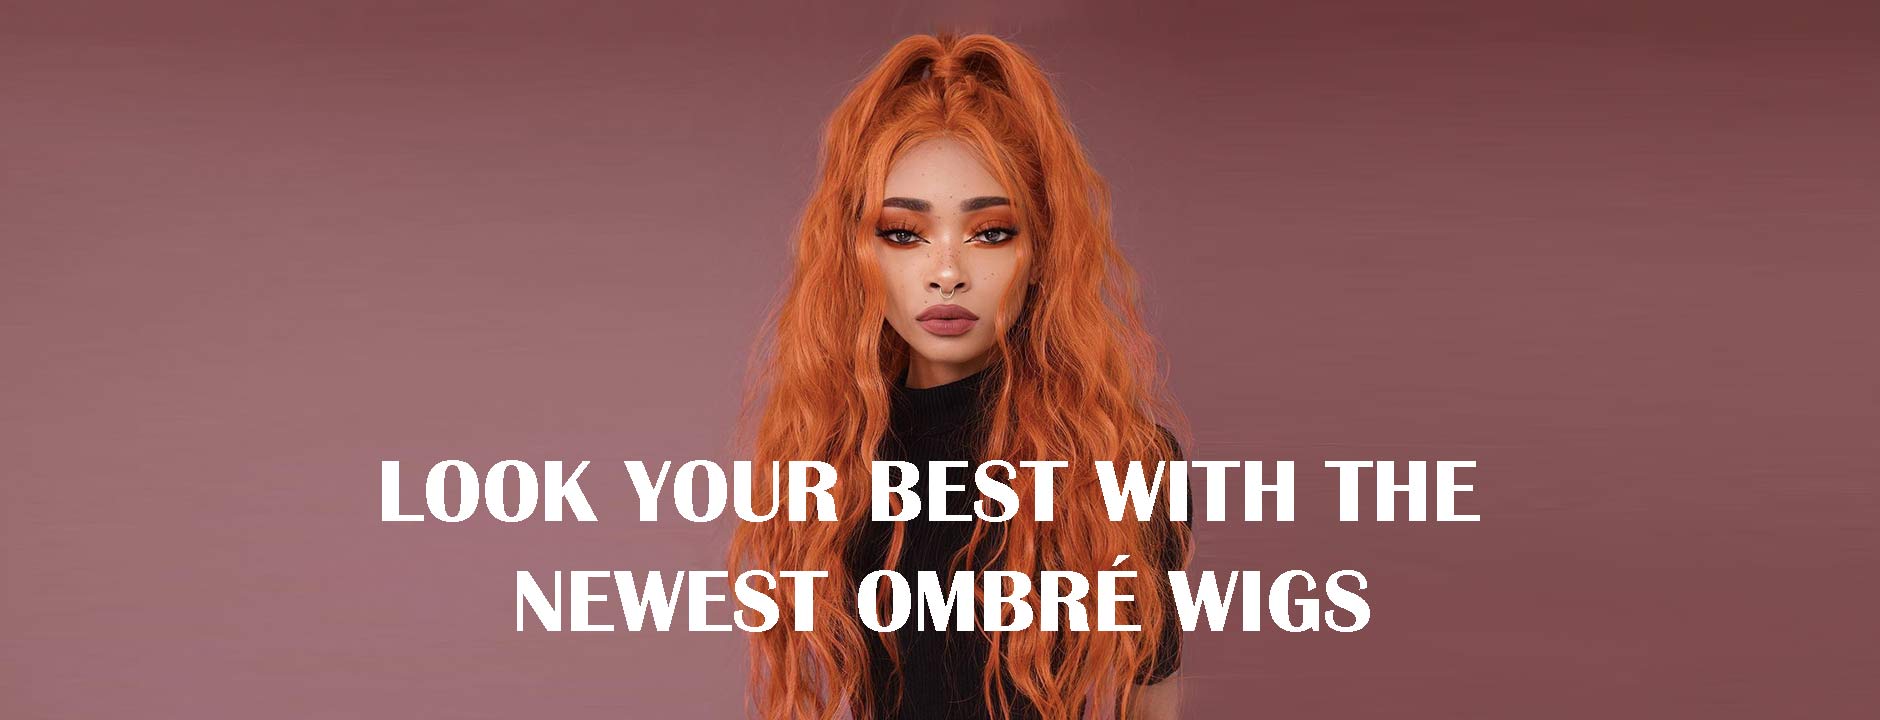 Look Your Best with the Newest Ombré Wigs